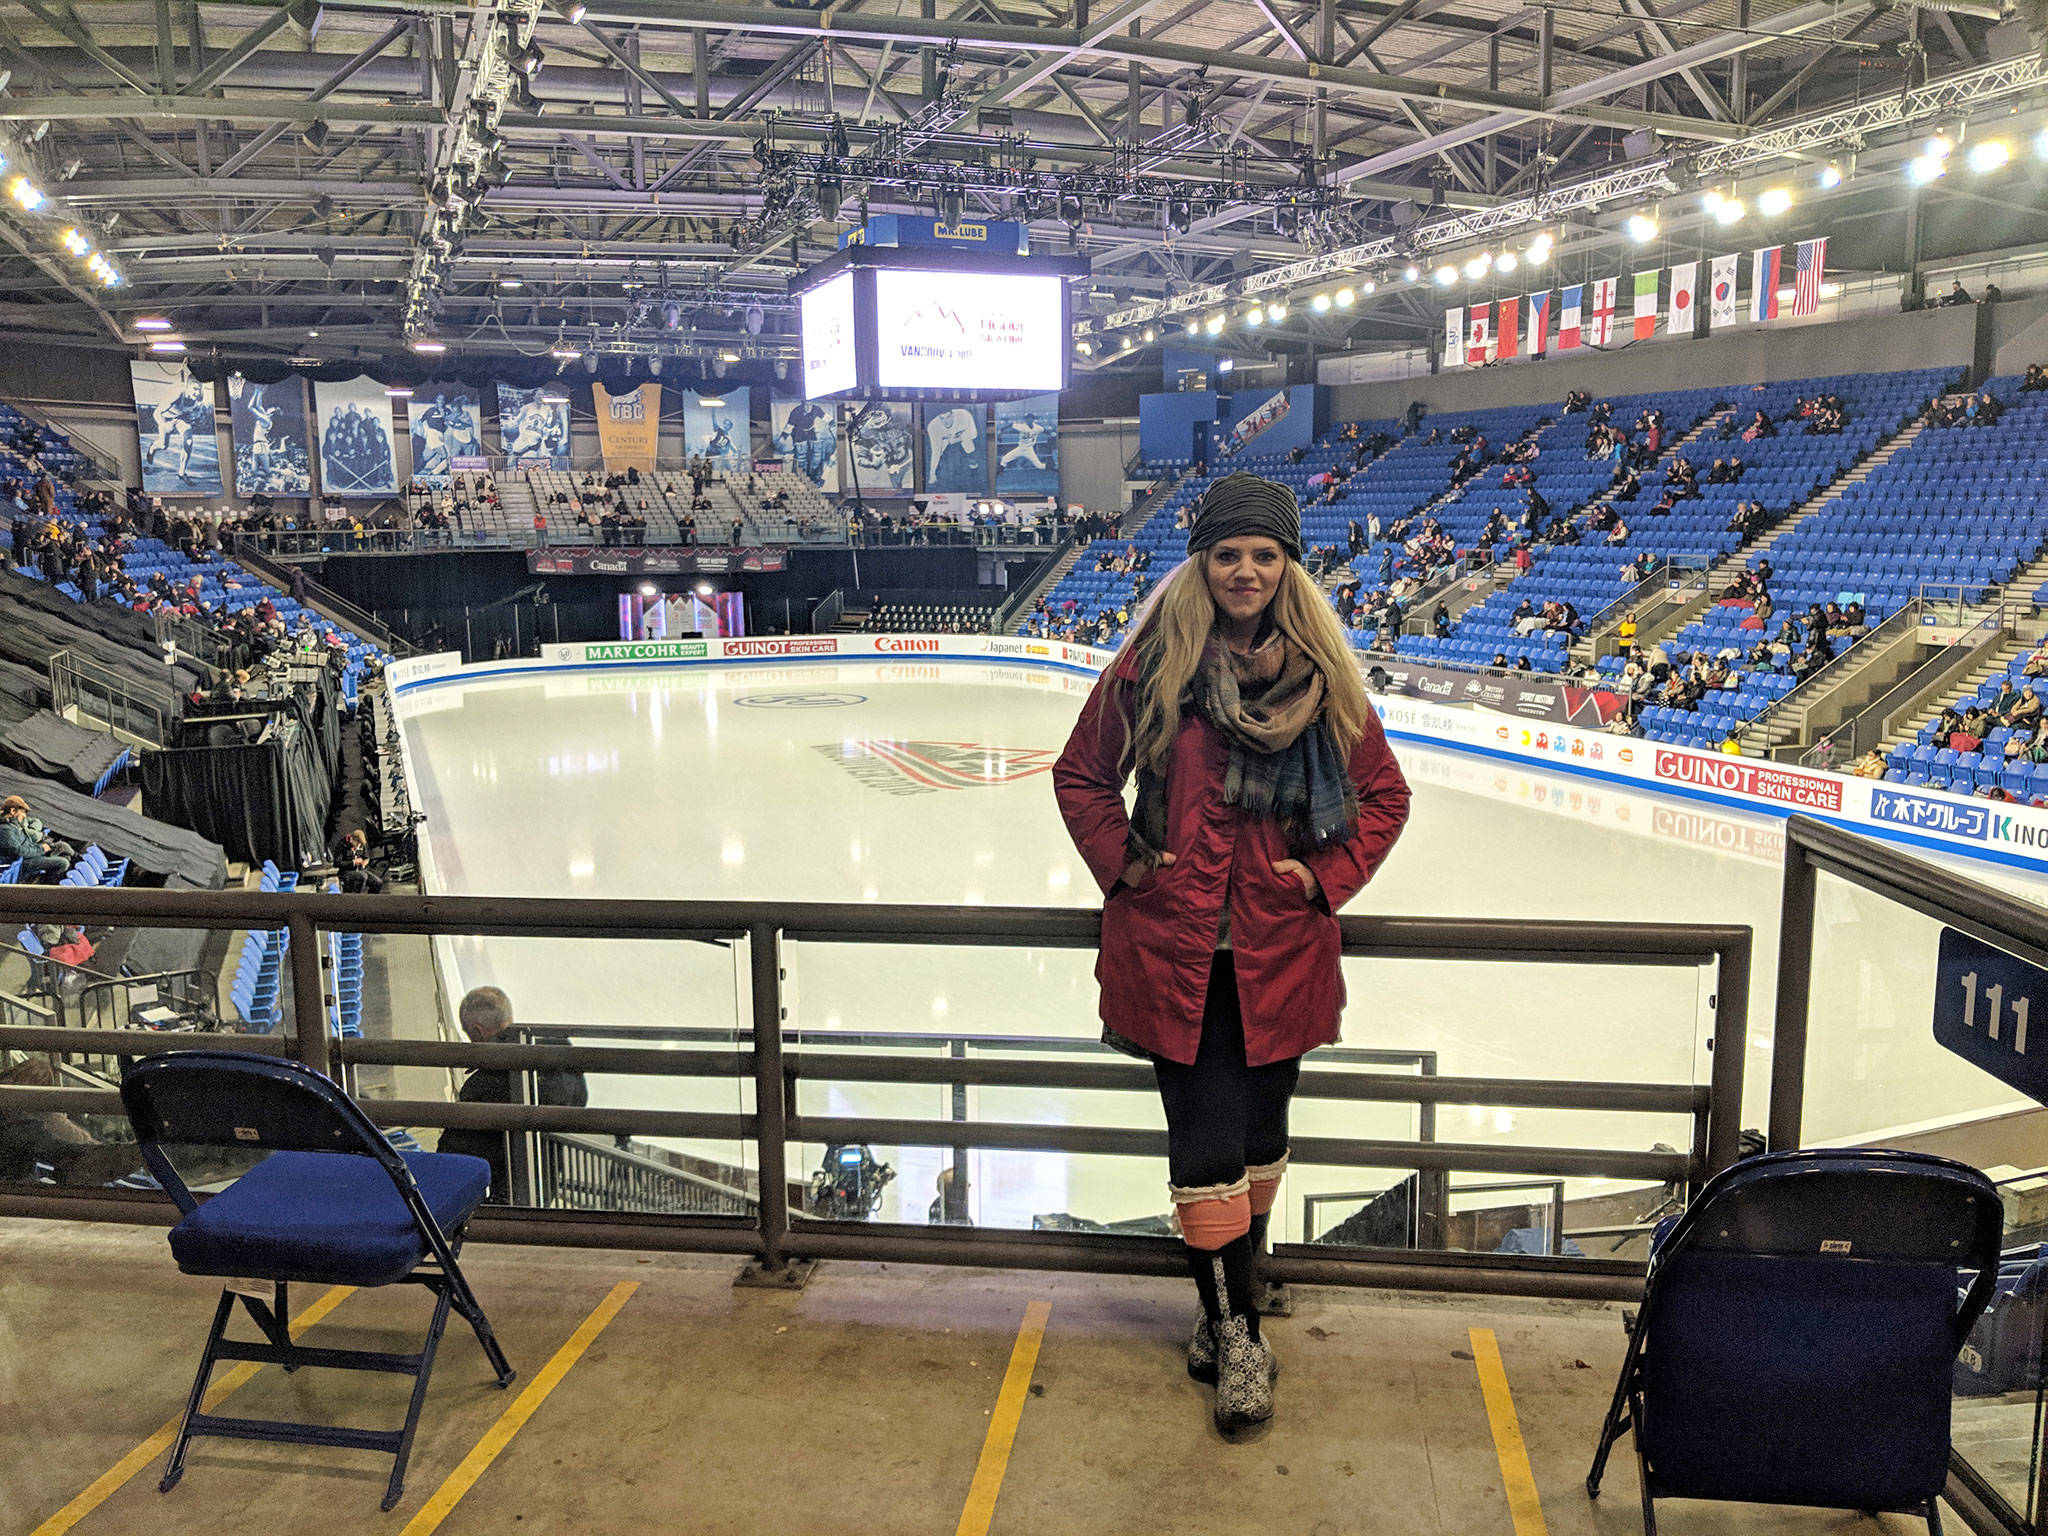 Jennifer Thomas, a Sequim composer, stands for a photo in Vancouver, B.C., during the 2018-19 Grand Prix Finals where she saw Rika Kihira of Japan skate to a first place finish. Kihira uses Thomas’ song “A Beautiful Storm” in Kihira’s free skate routine. Photo courtesy of Jennifer Thomas